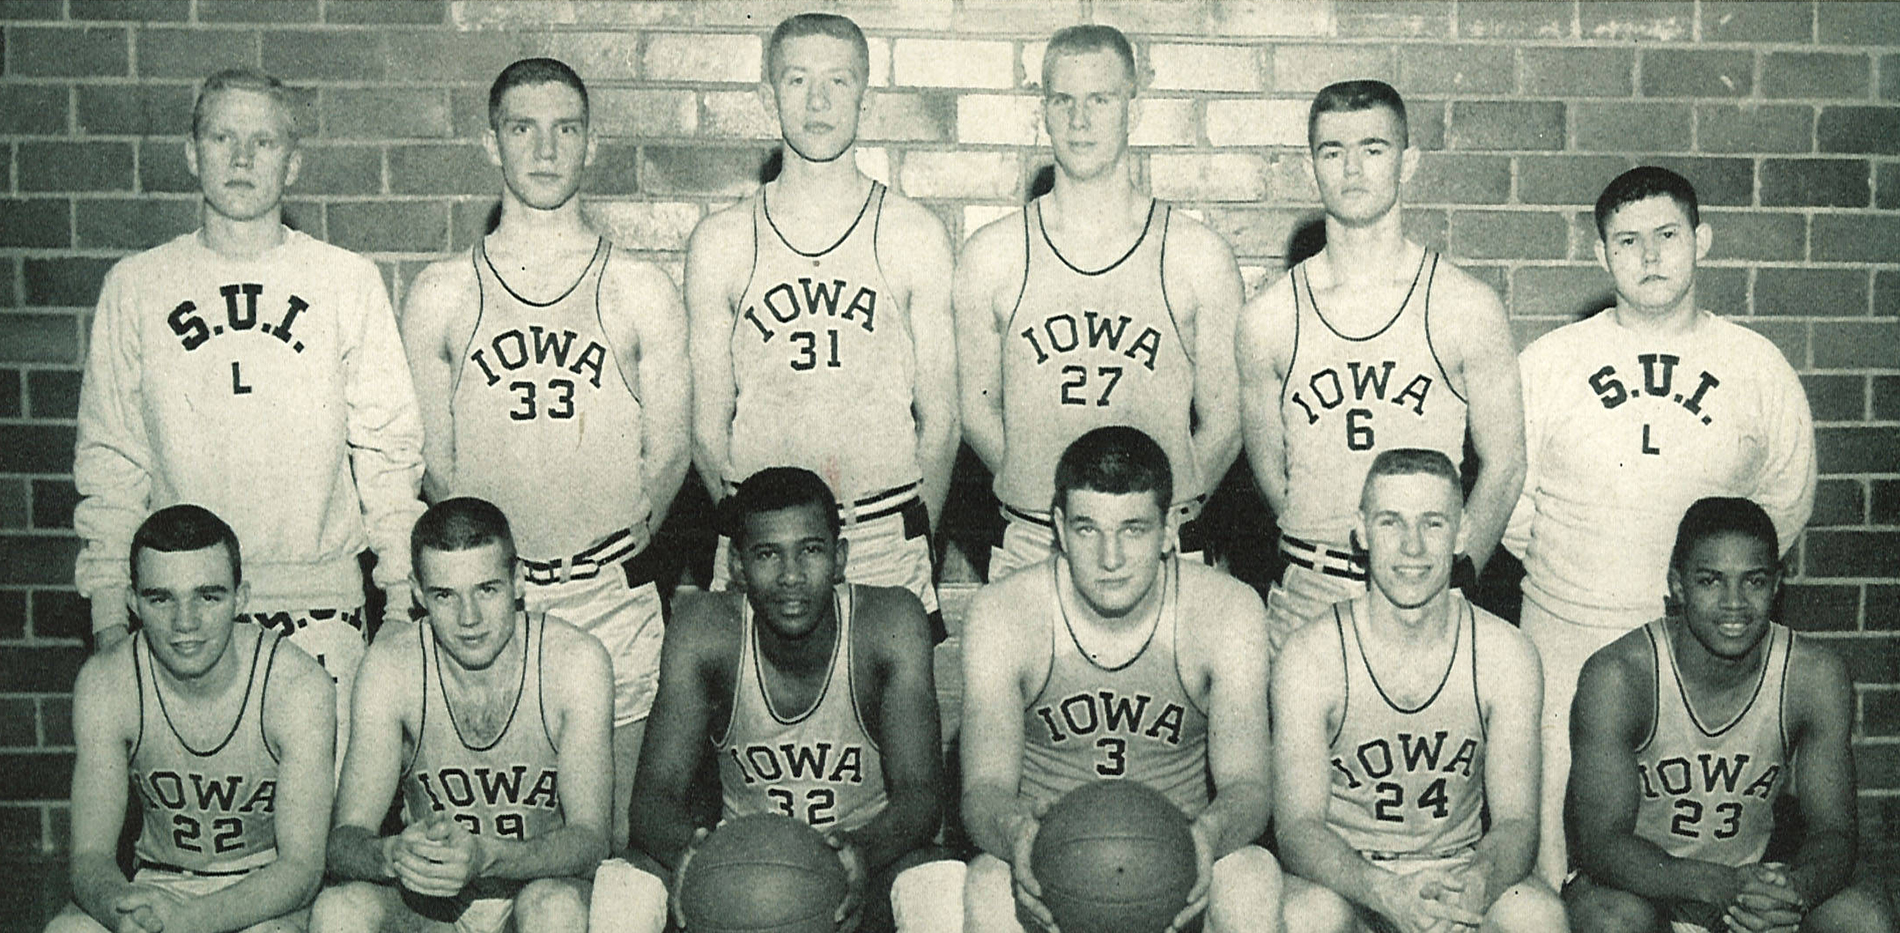 What is the history of the Hawkeye basketball team?